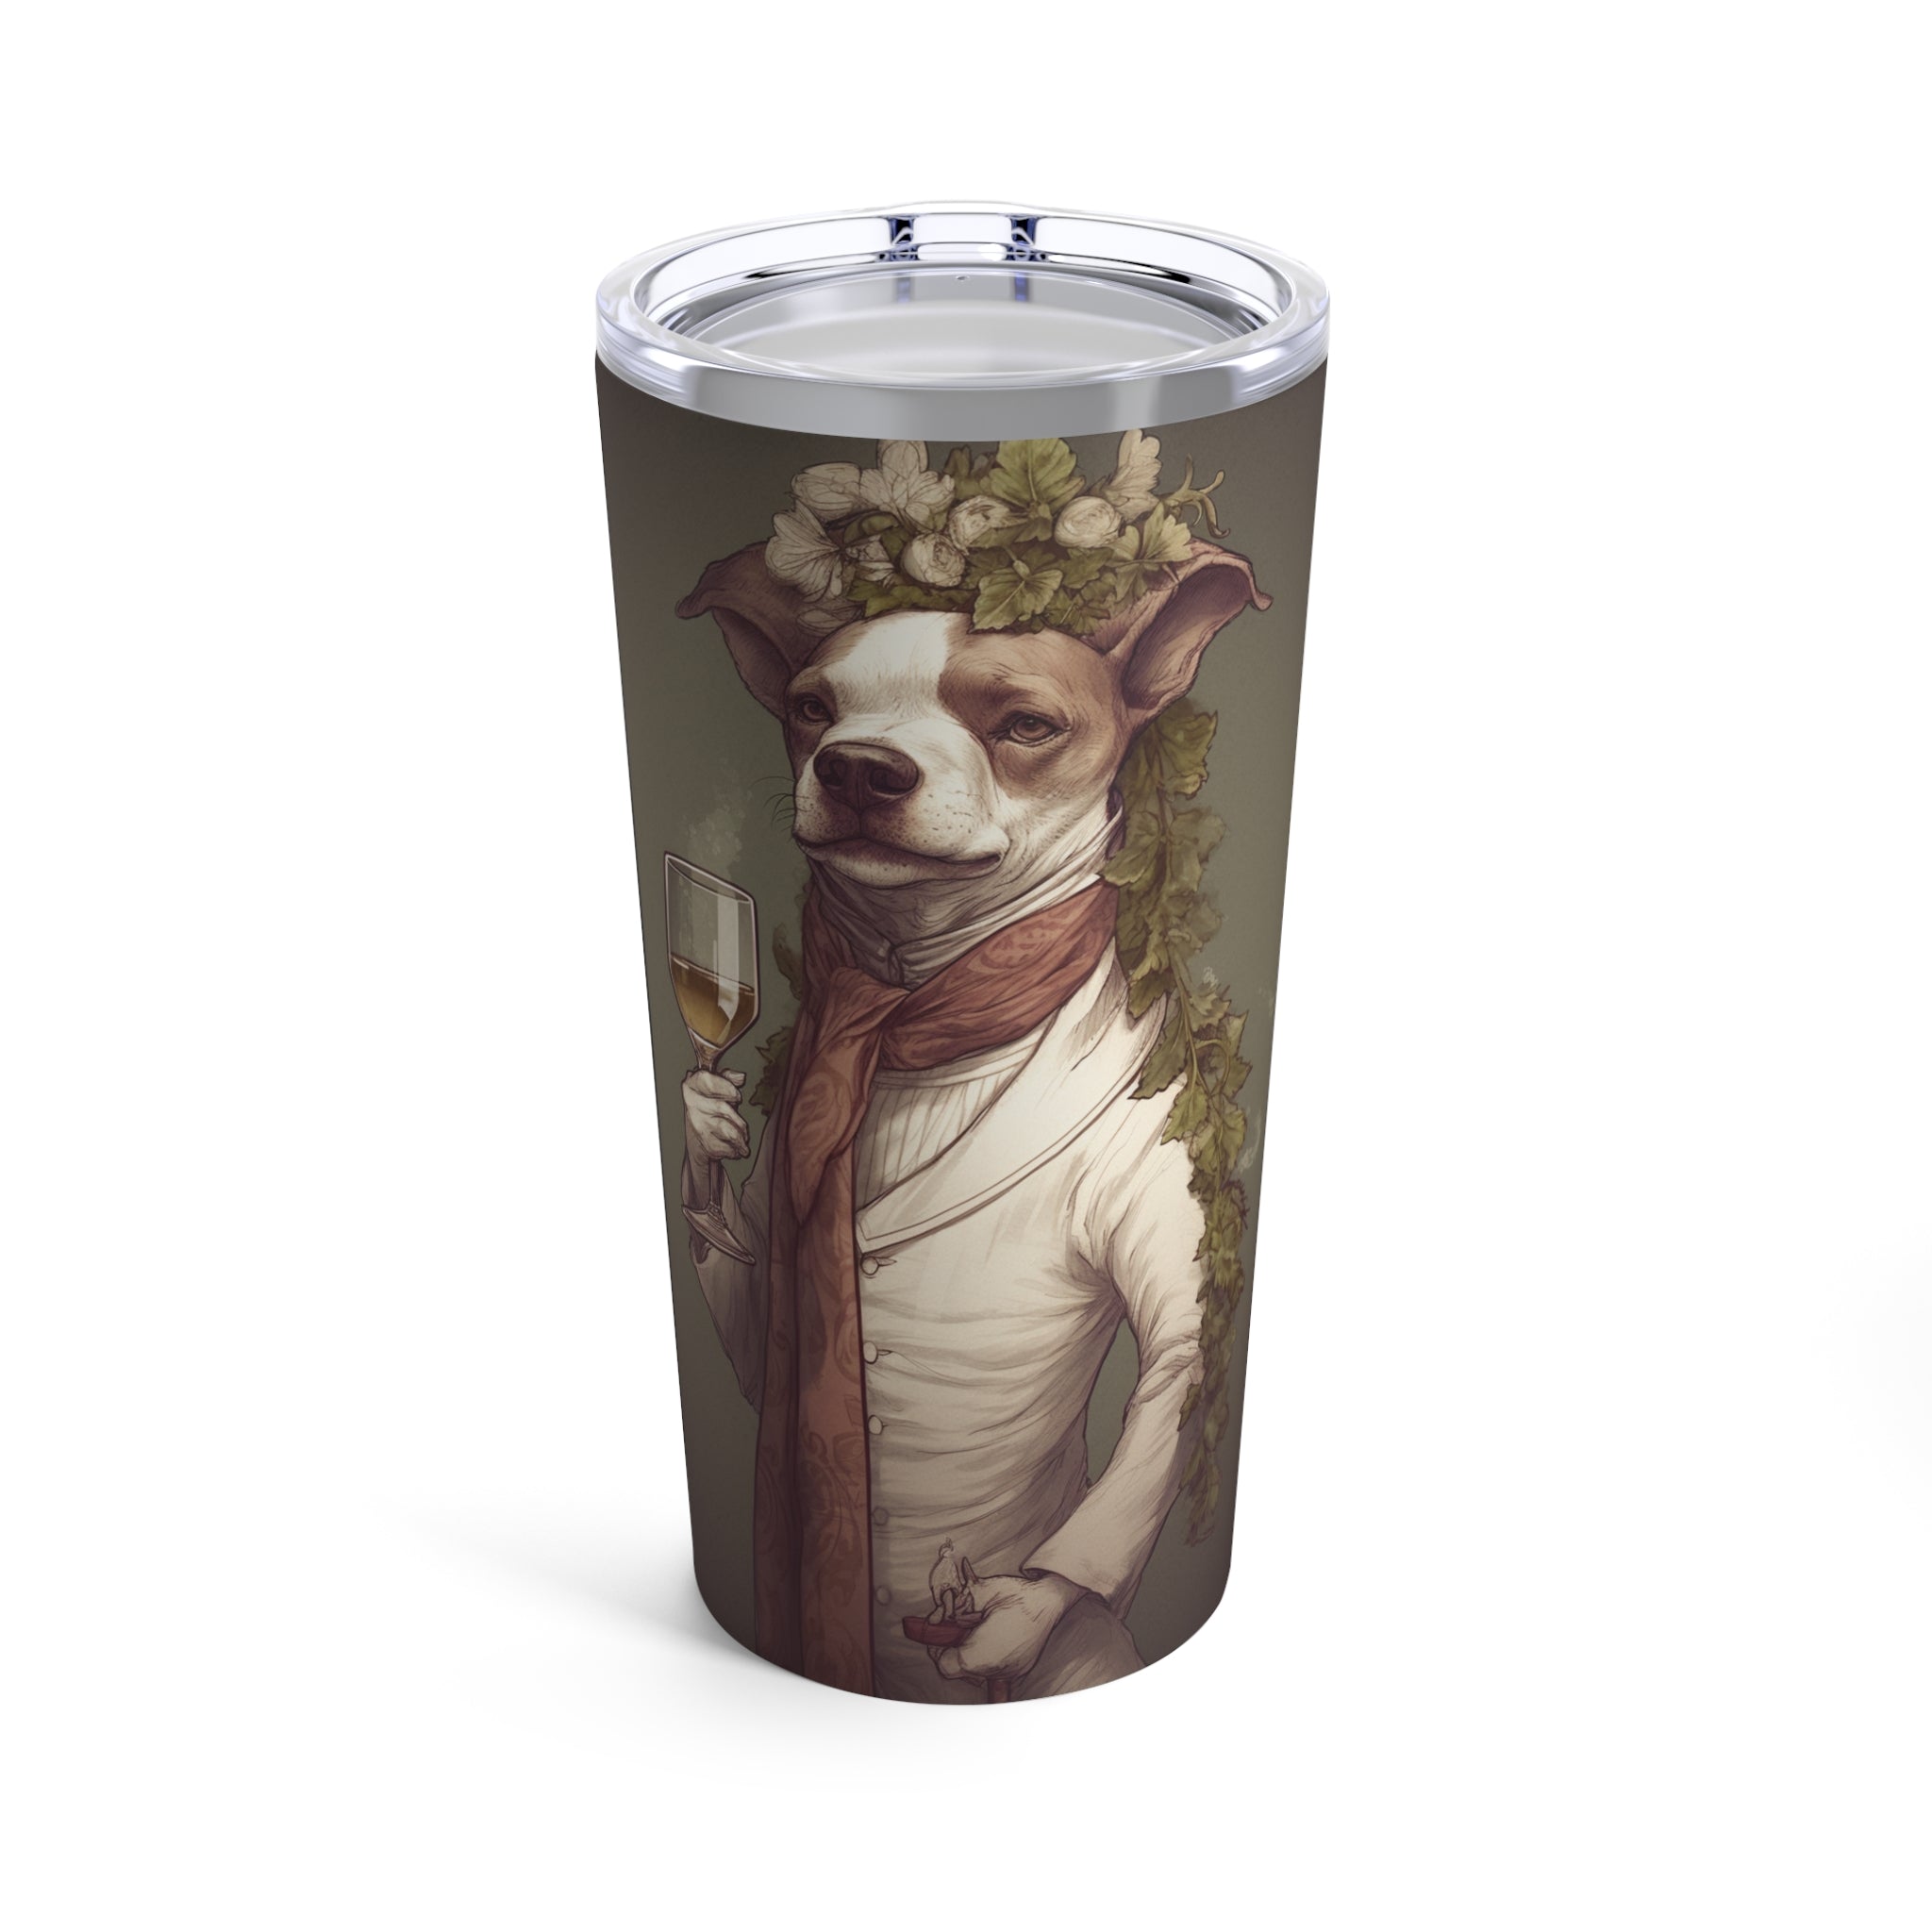 🍷 Wine Baron Doggy Gentleman Tumbler 20oz - Stylish Dog Lover's Wine Glass | Sip in Elegance with Your Furry Companion